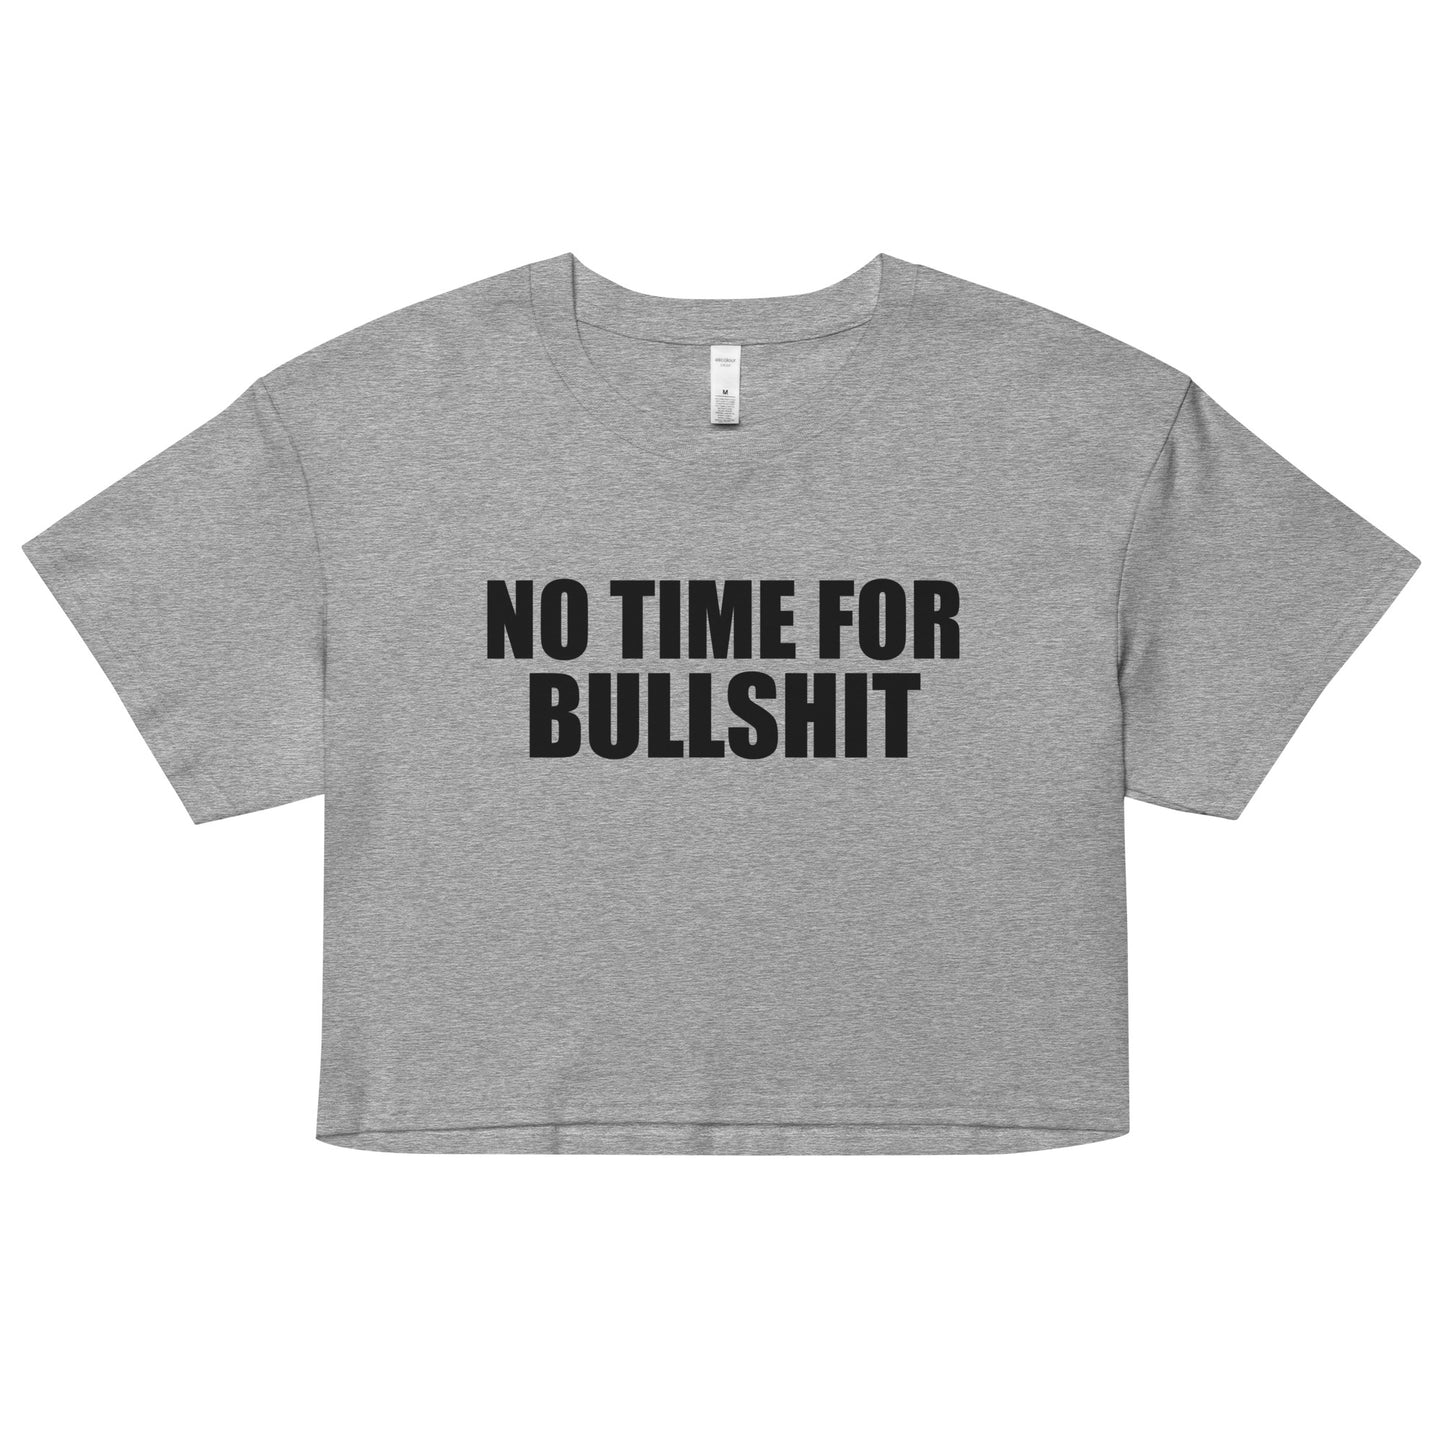 NO TIME FOR BS - Women’s crop top